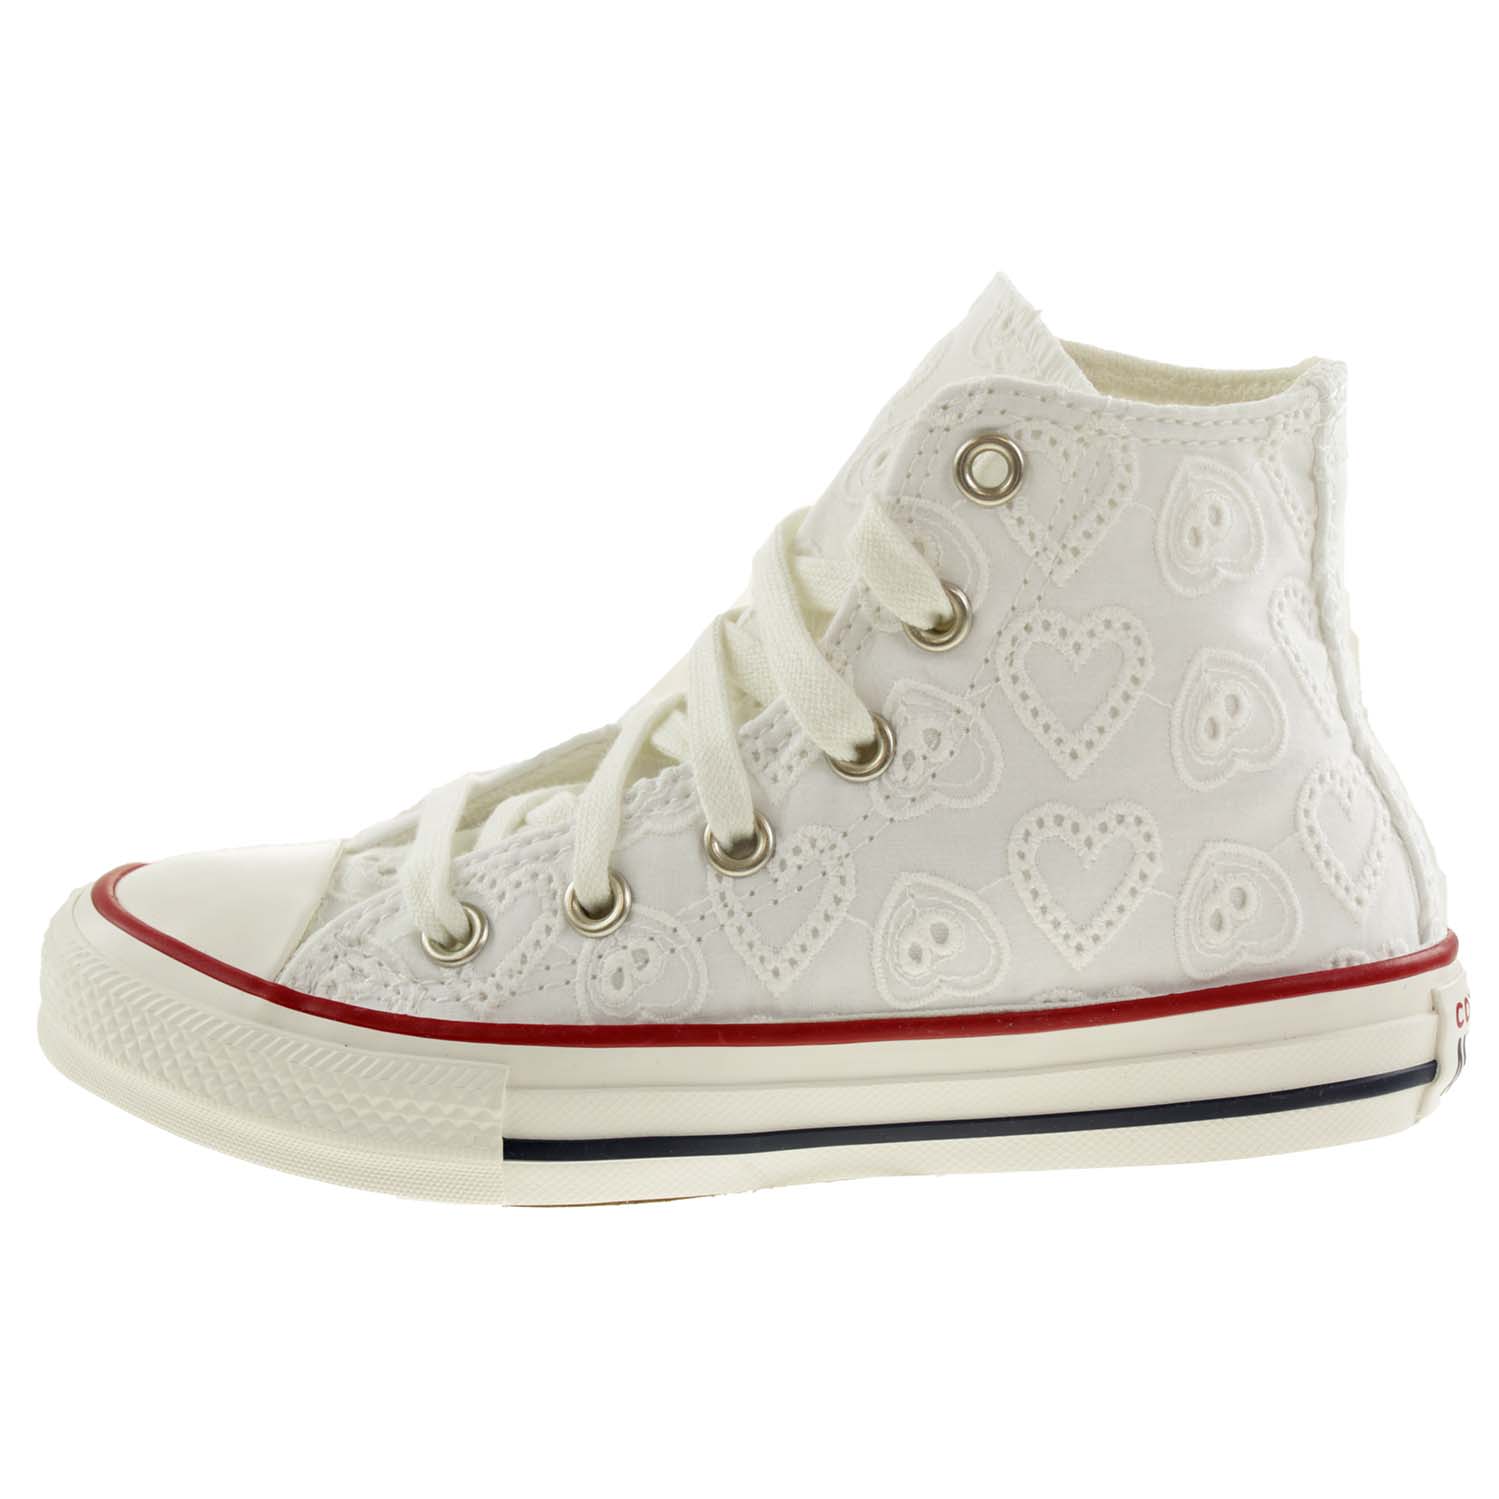 Converse Kinder Love Ceremony Chuck Taylor All Star High-Top Sneaker 671097 weiss